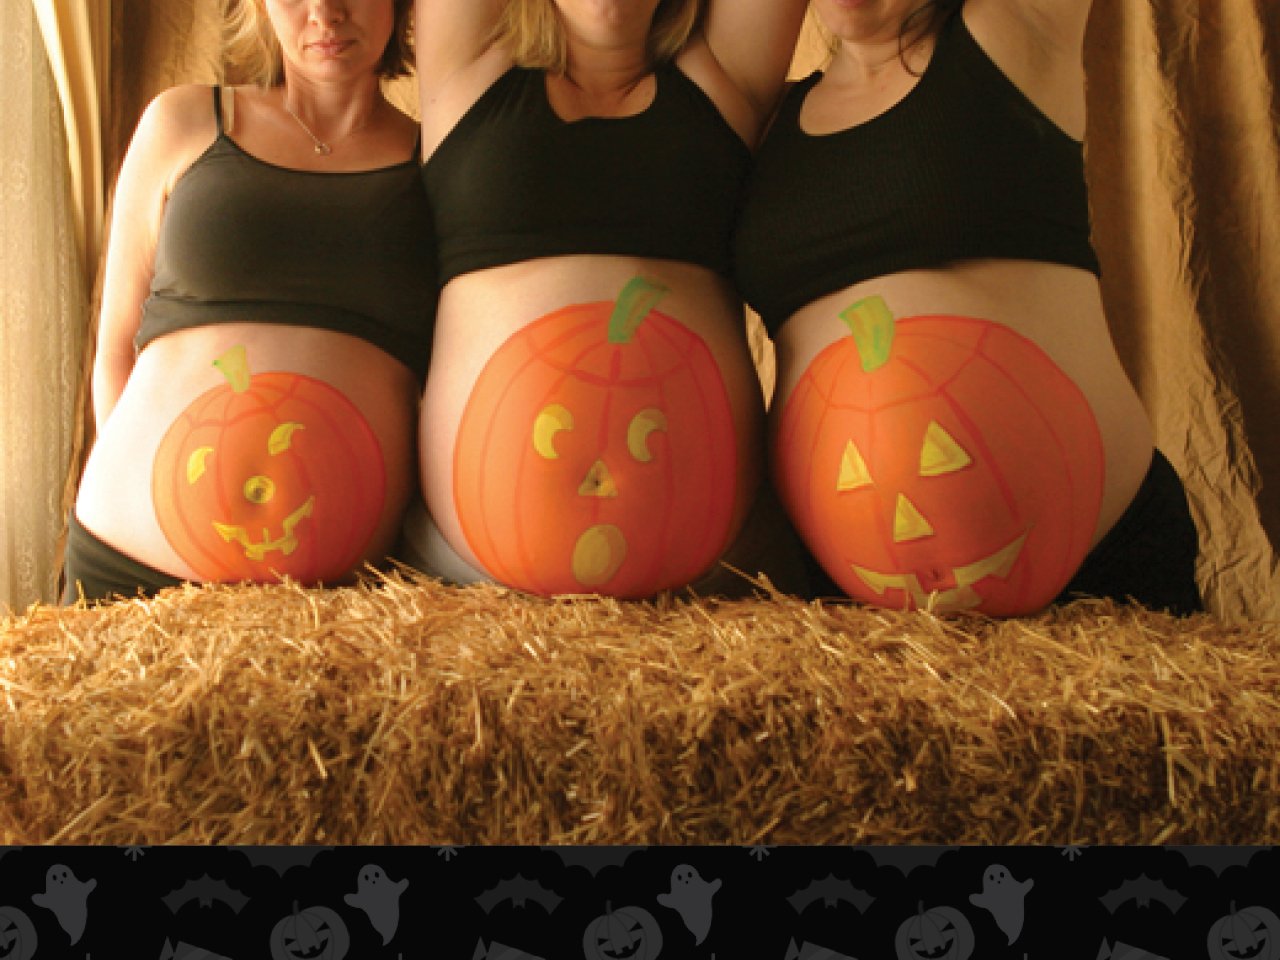 three women with pumpkins painted on their pregnant bellies